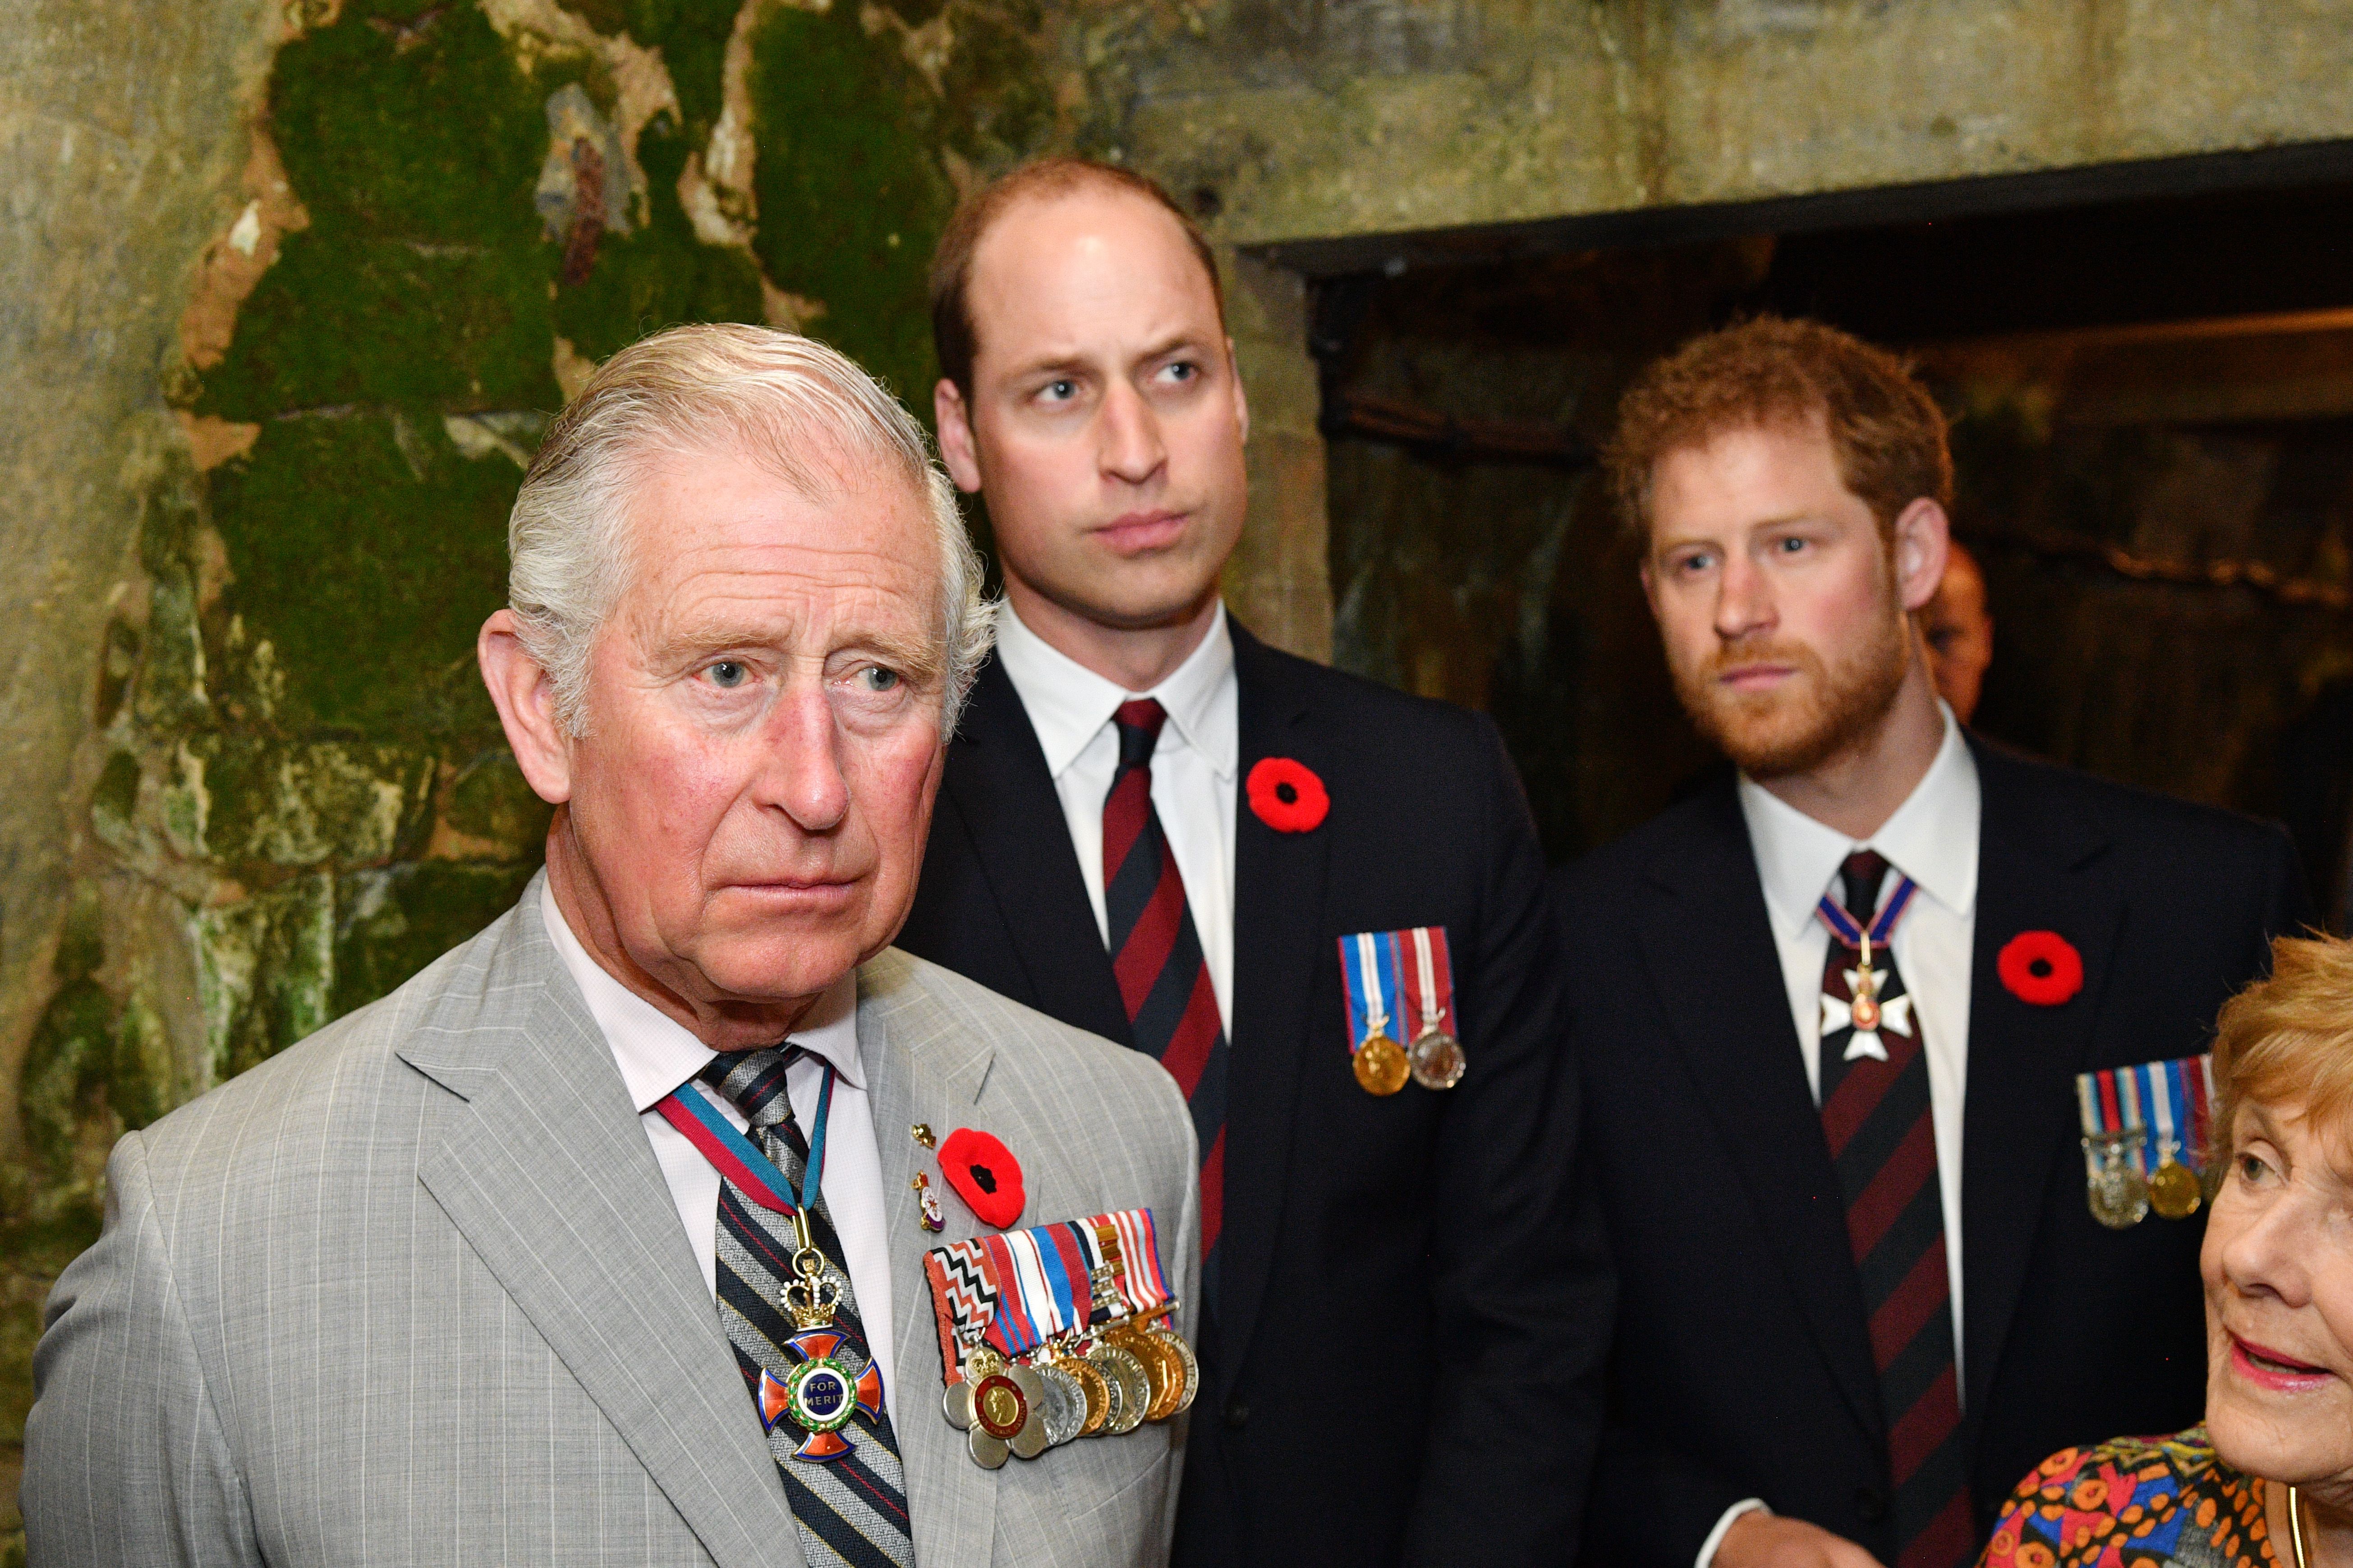 Prince Charles, Prince William and Prince Harry pictured at the tunnel and trenches at Vimy Memorial Park, 2009, Vimy, France. | Photo: Getty Images